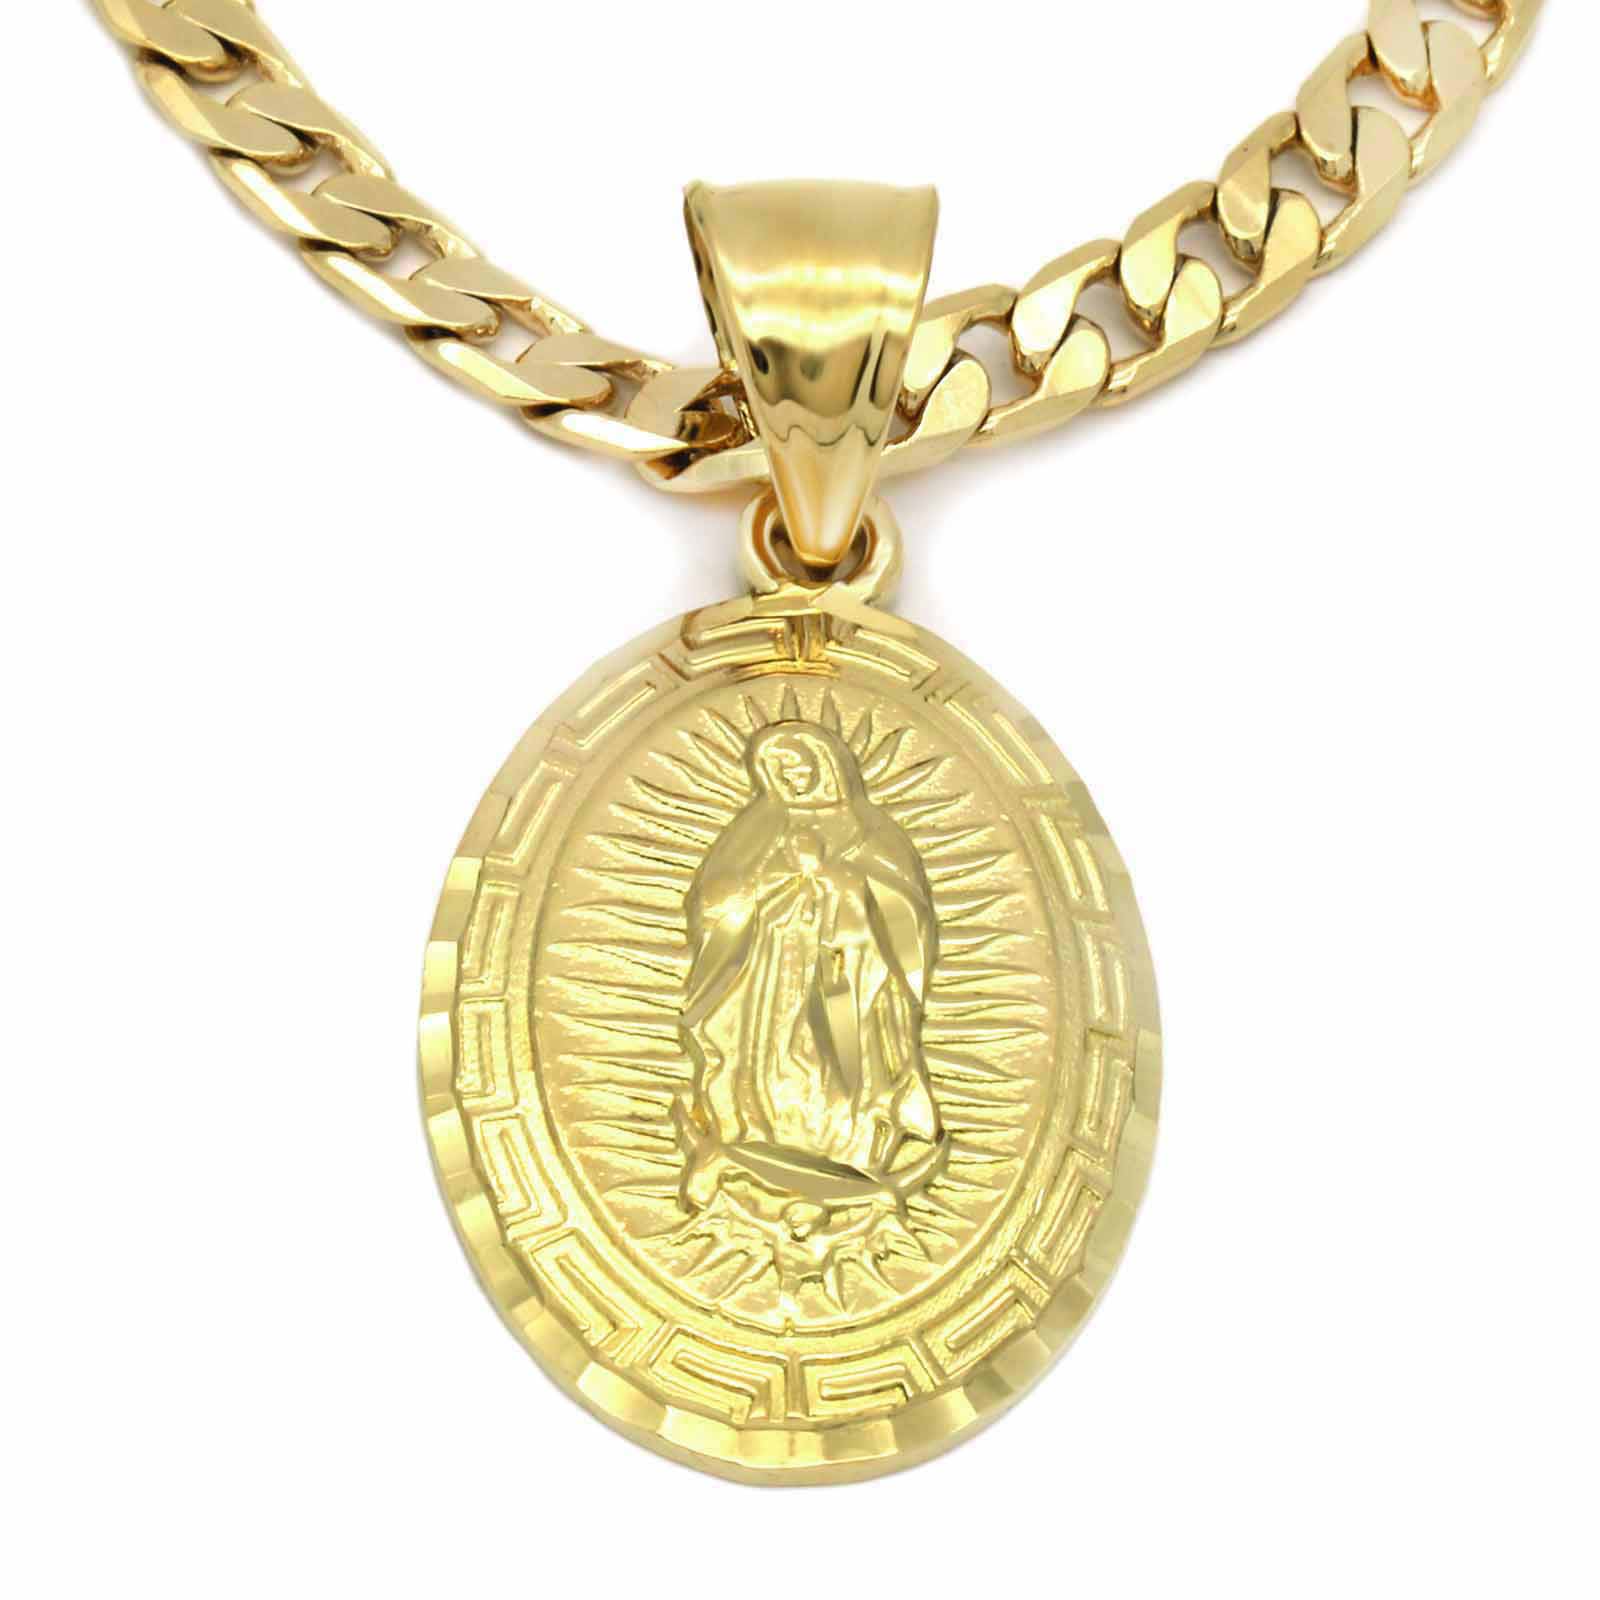 VIRGIN MARY GUADALUPE COIN PENDANT